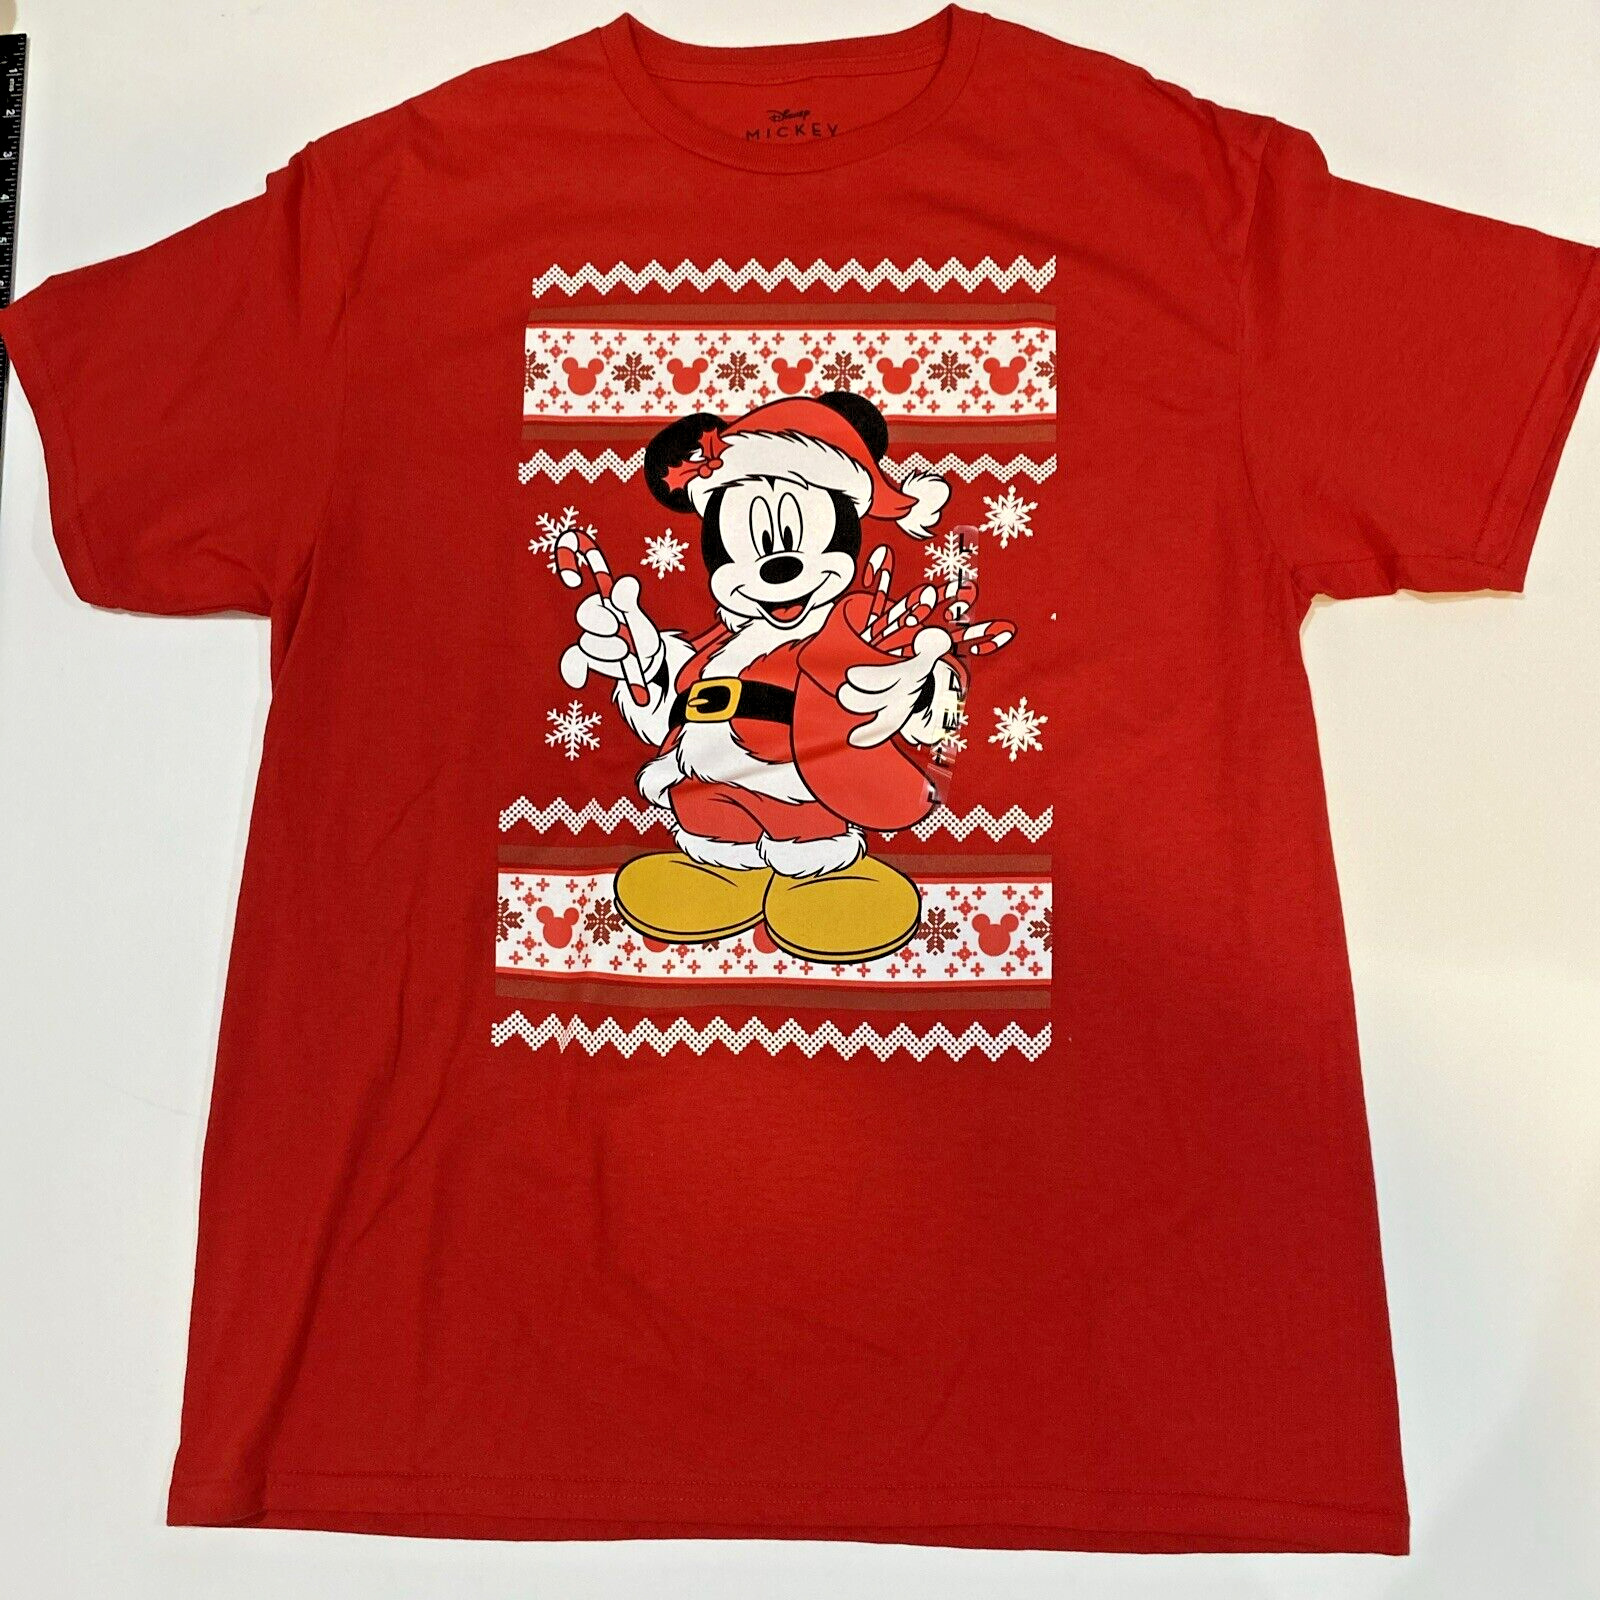 Disney’s Mickey Mouse As Santa - Red T Shirt - Large - New